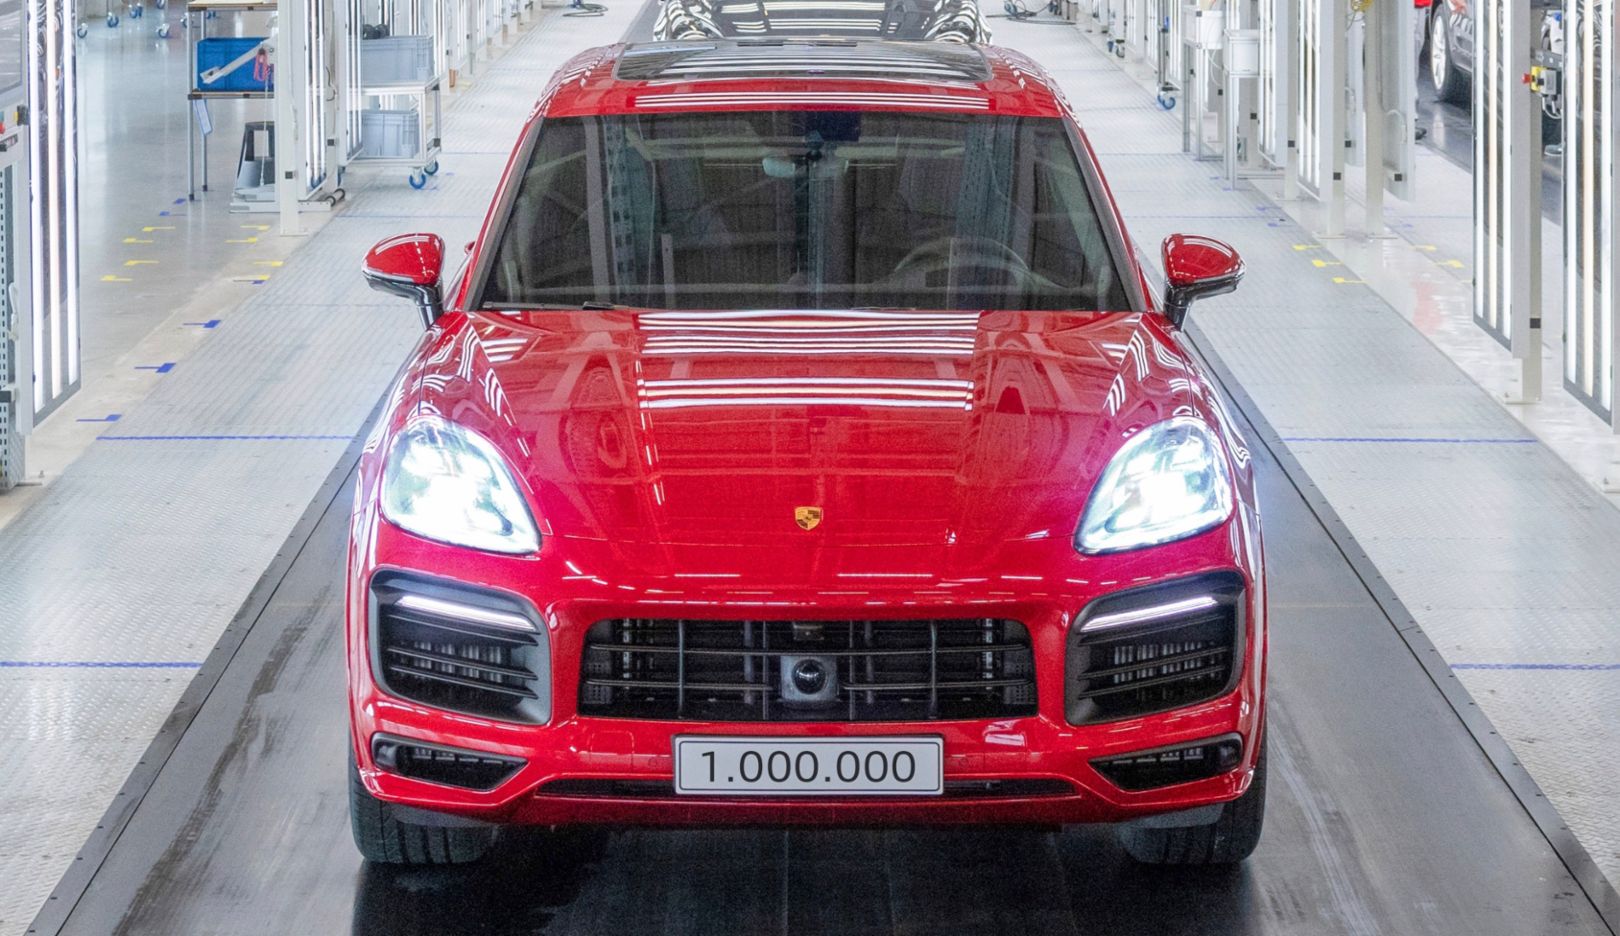 The Cayenne journey – courage, secrets and world records